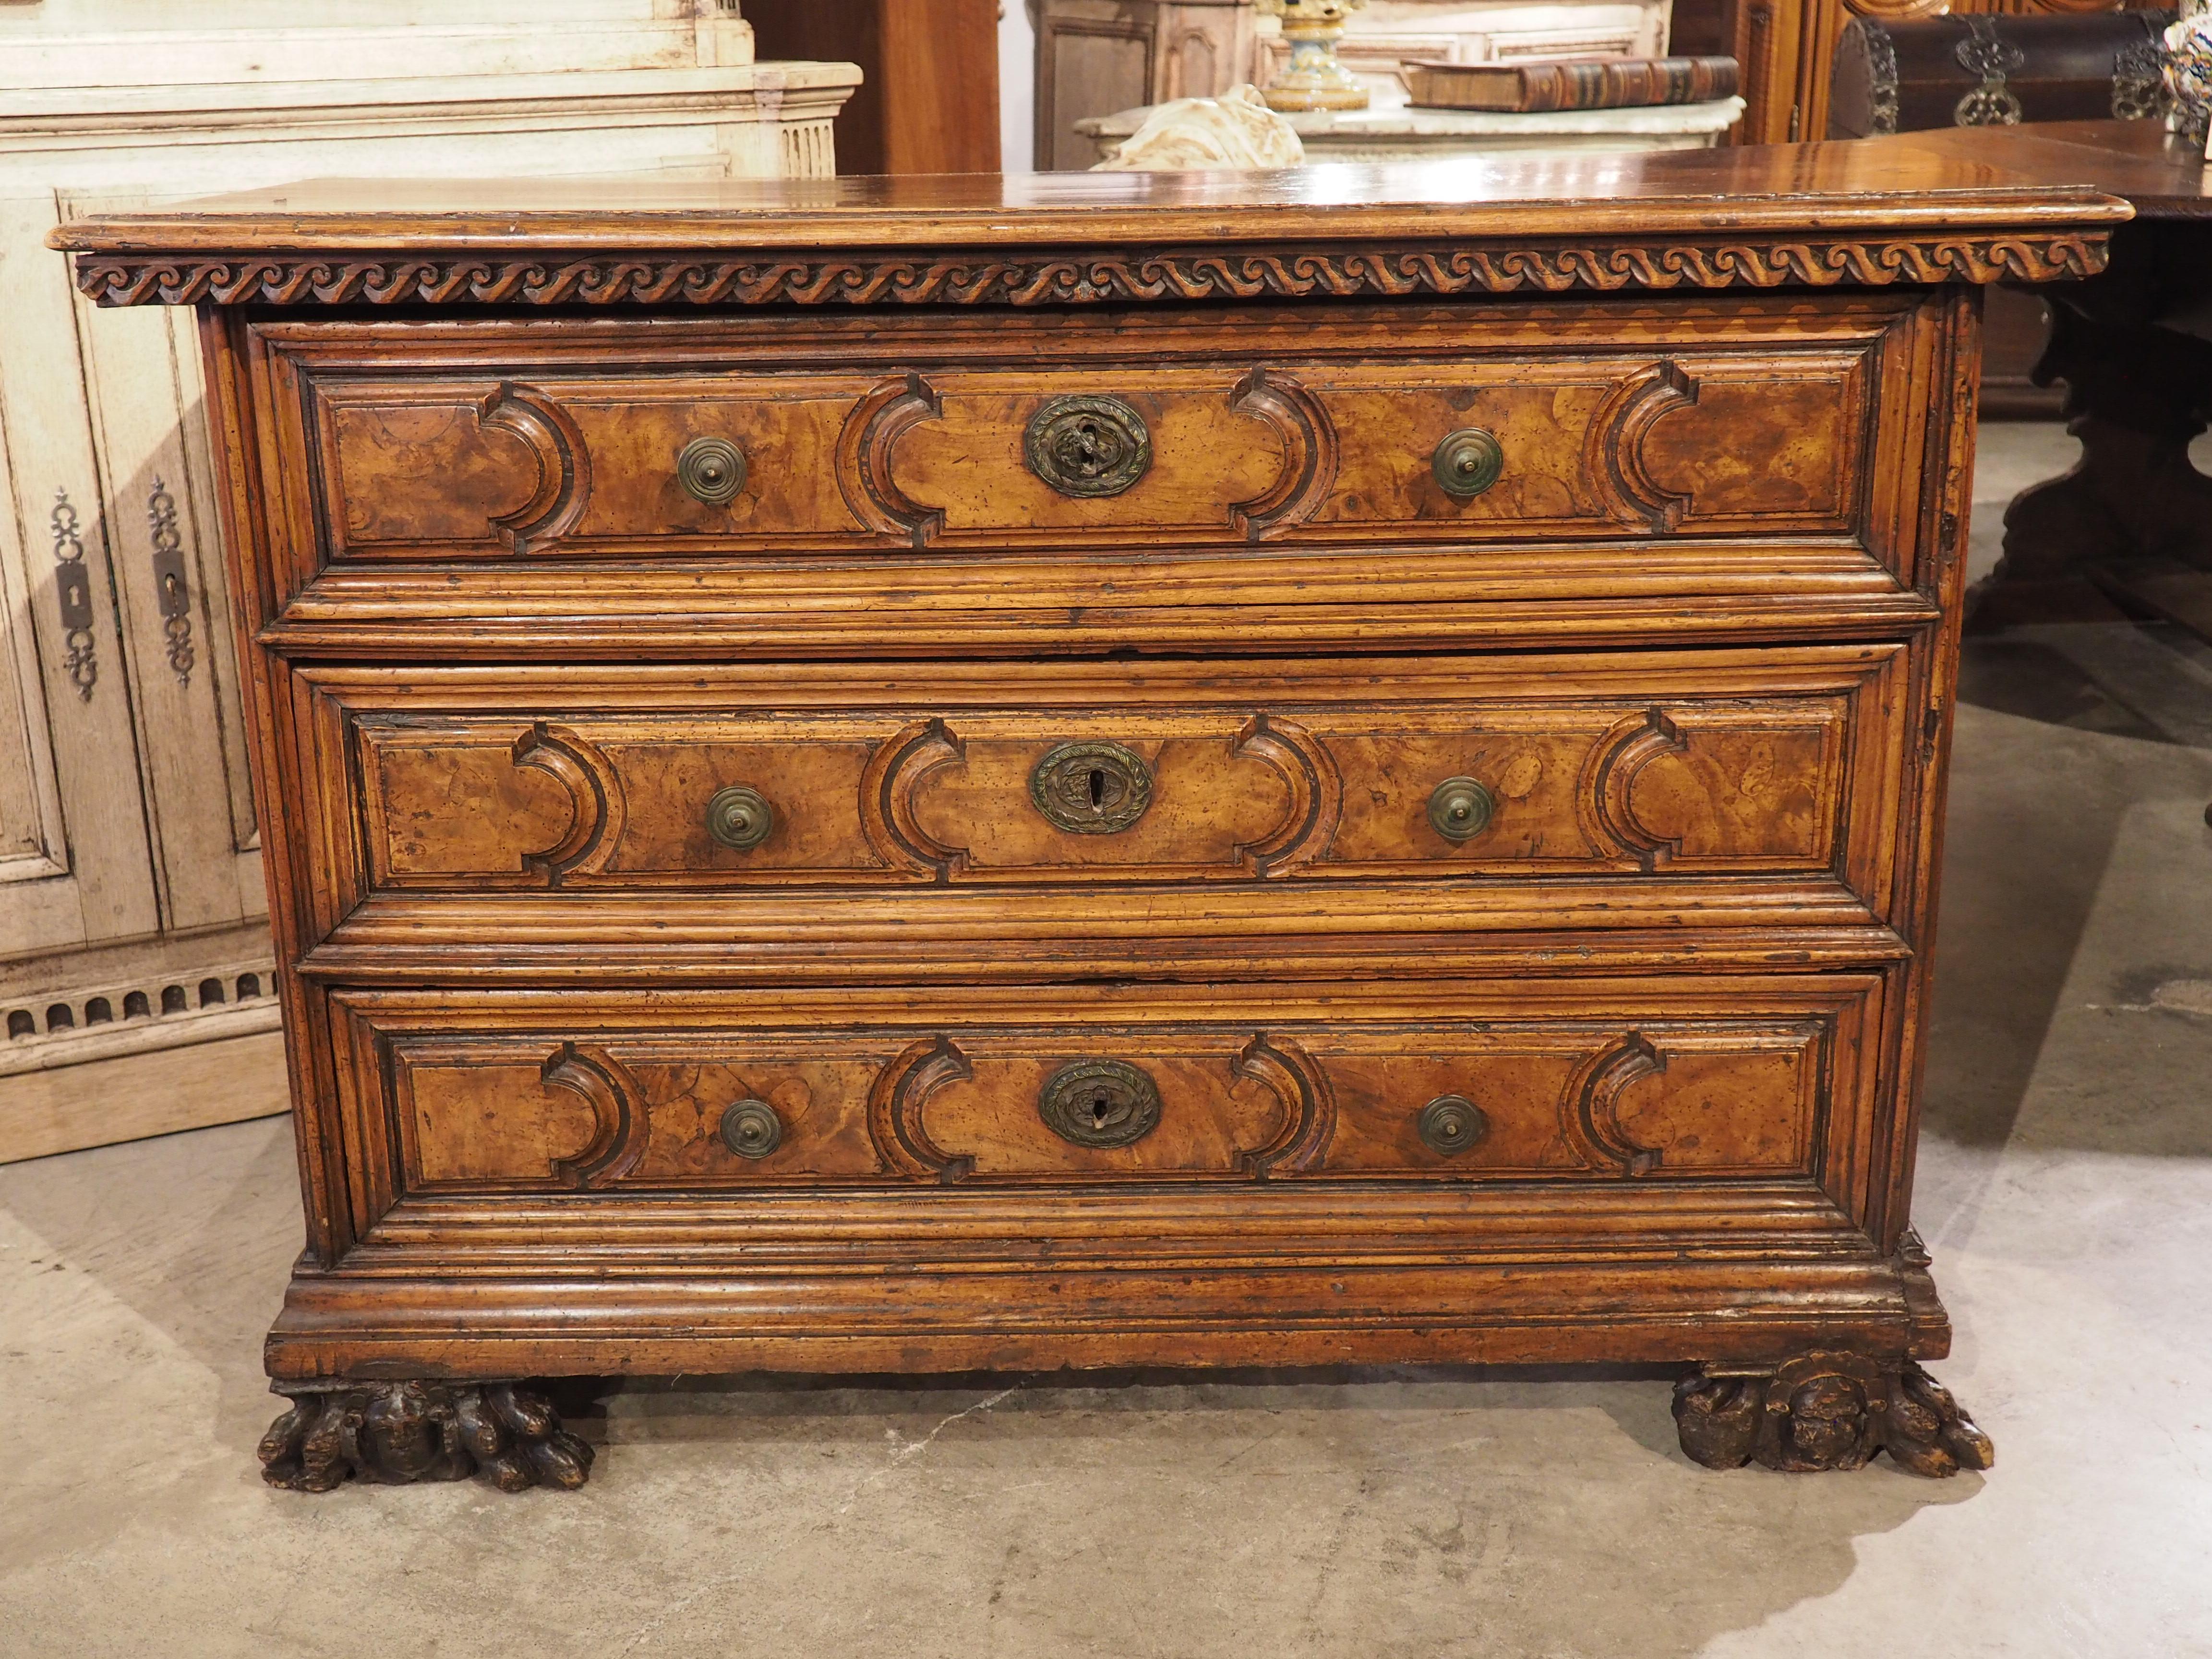 Hand-Carved 17th Century Walnut and Burl Walnut Commode from Tuscany, Italy